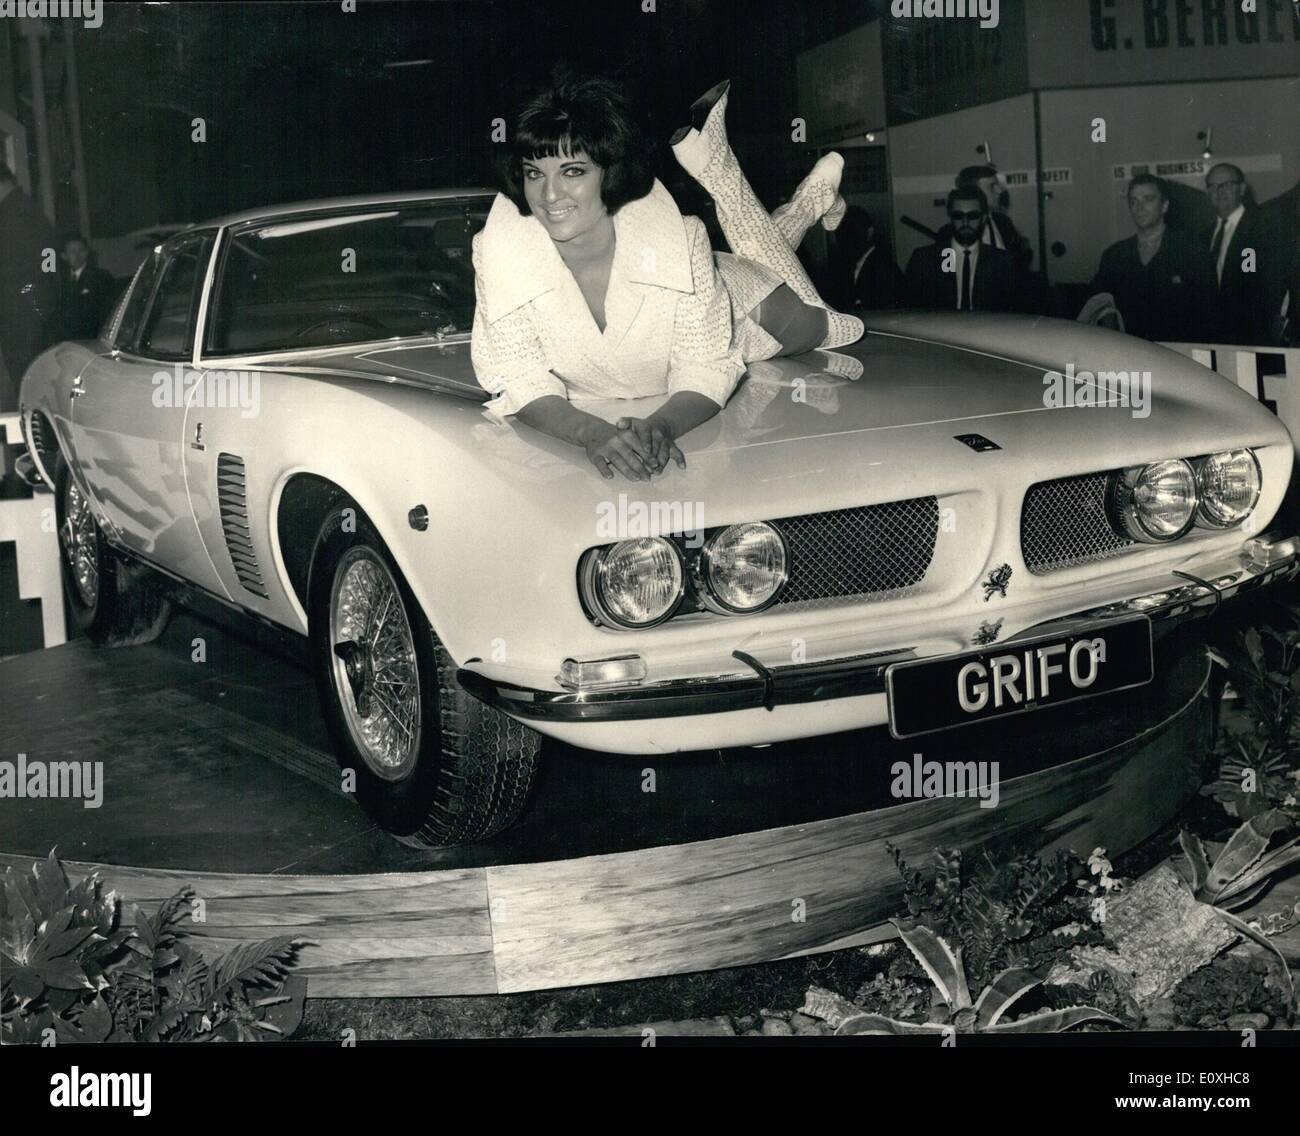 Oct. 10, 1966 - Preview of The Motor Show. hoto Shows:- Rita Romano pictured with the Iso Grifo 2-seater sports car, a Stock Photo